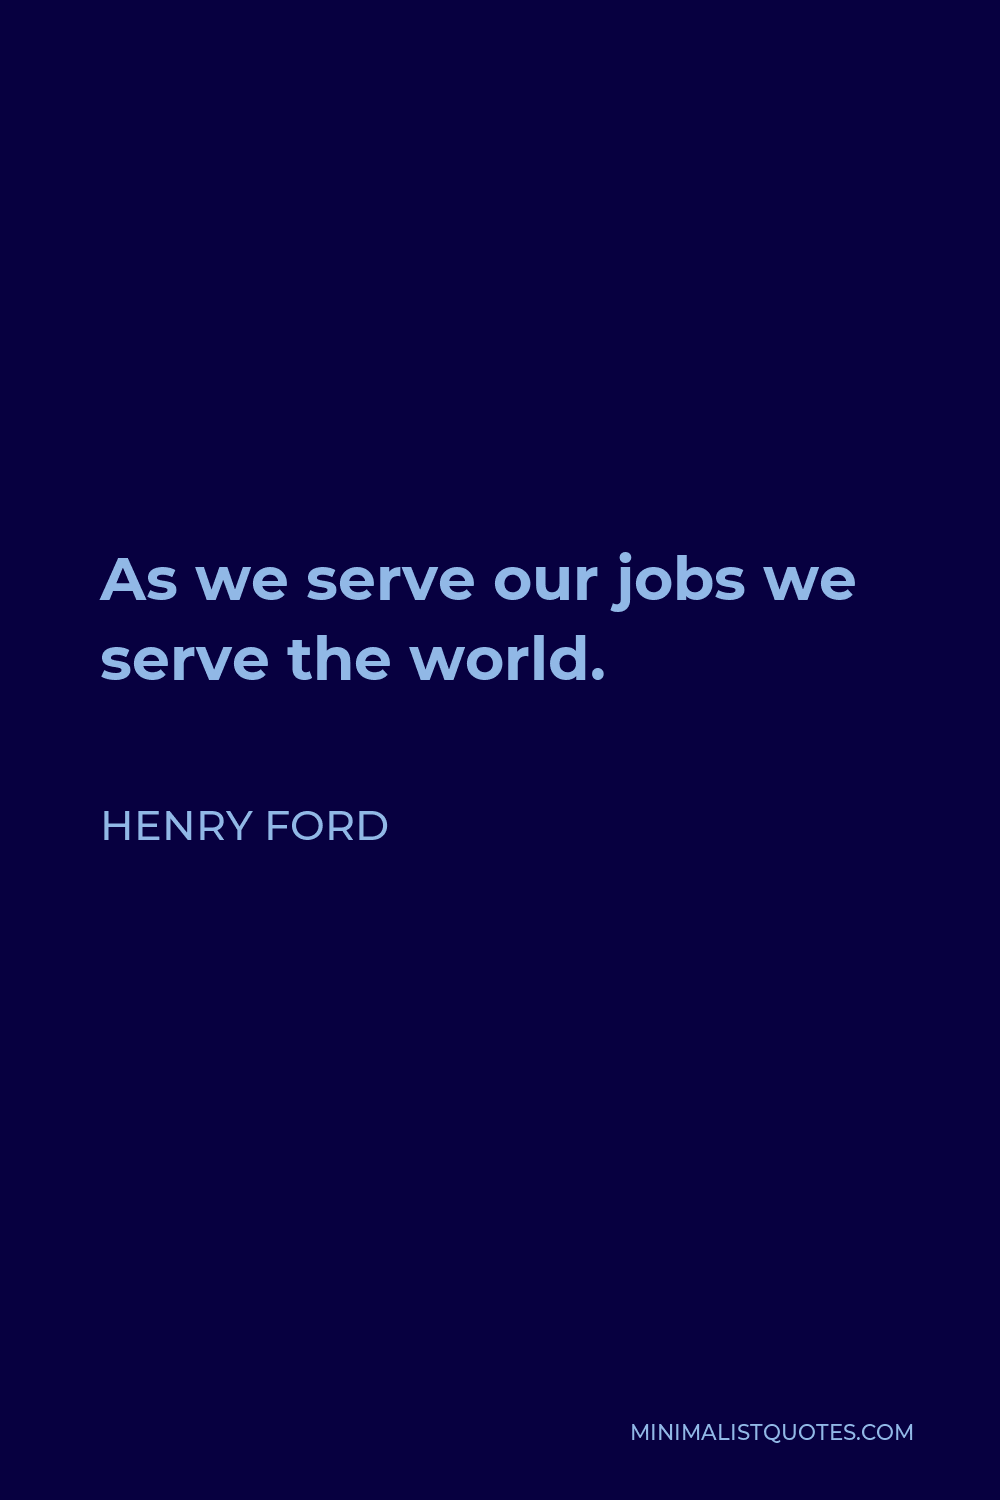 Henry Ford Quote - As we serve our jobs we serve the world.